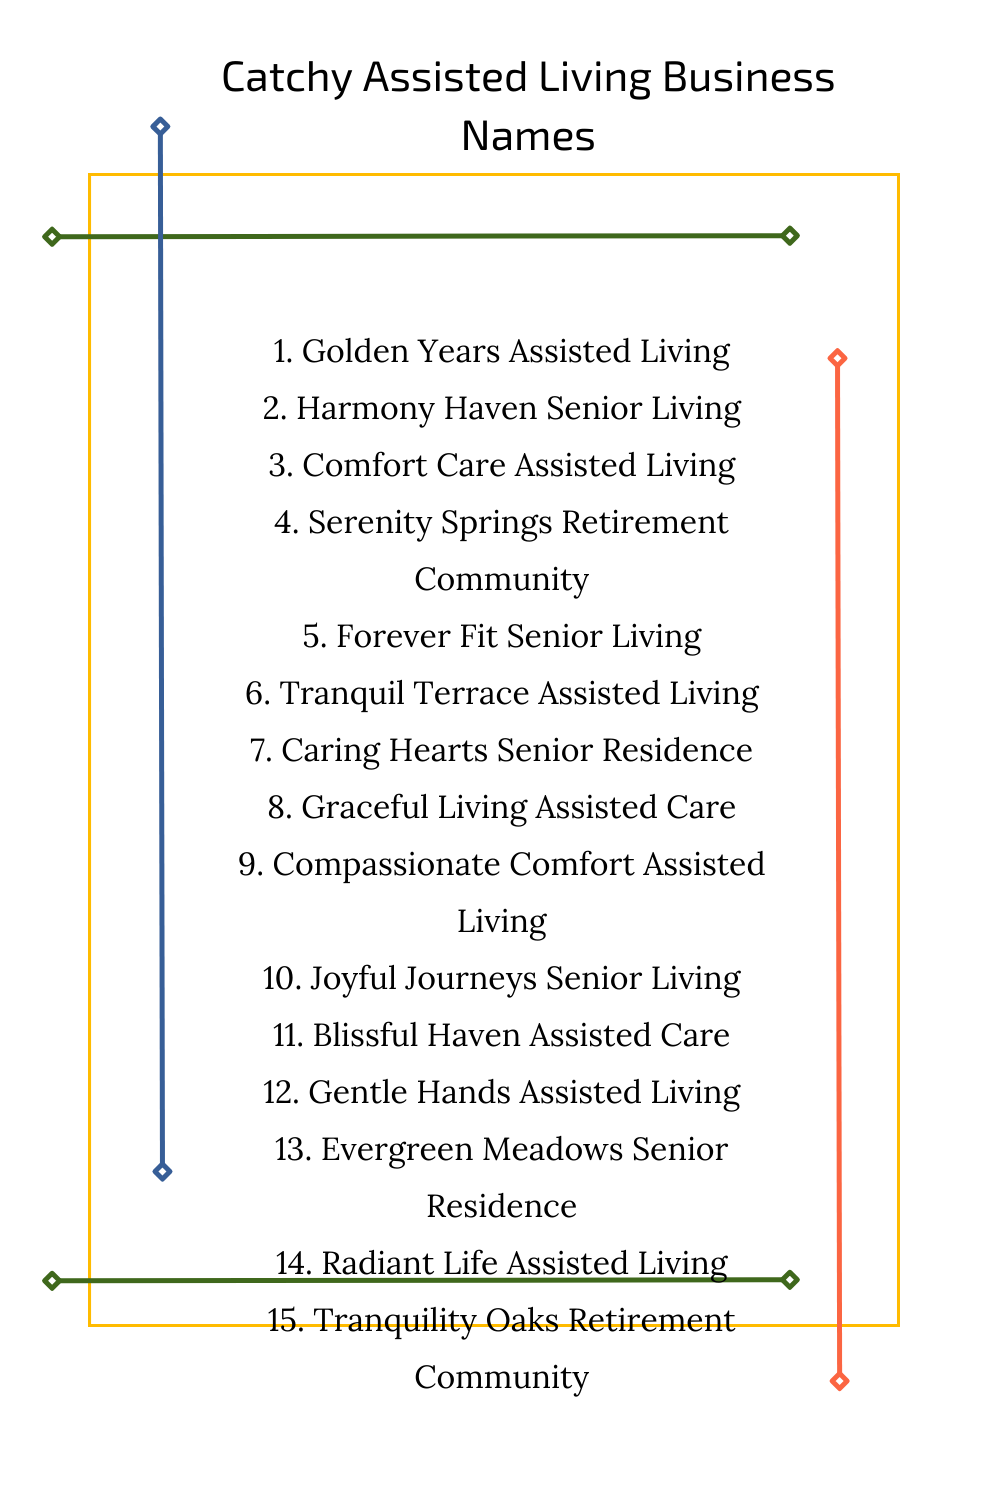 Catchy Assisted Living Business Names